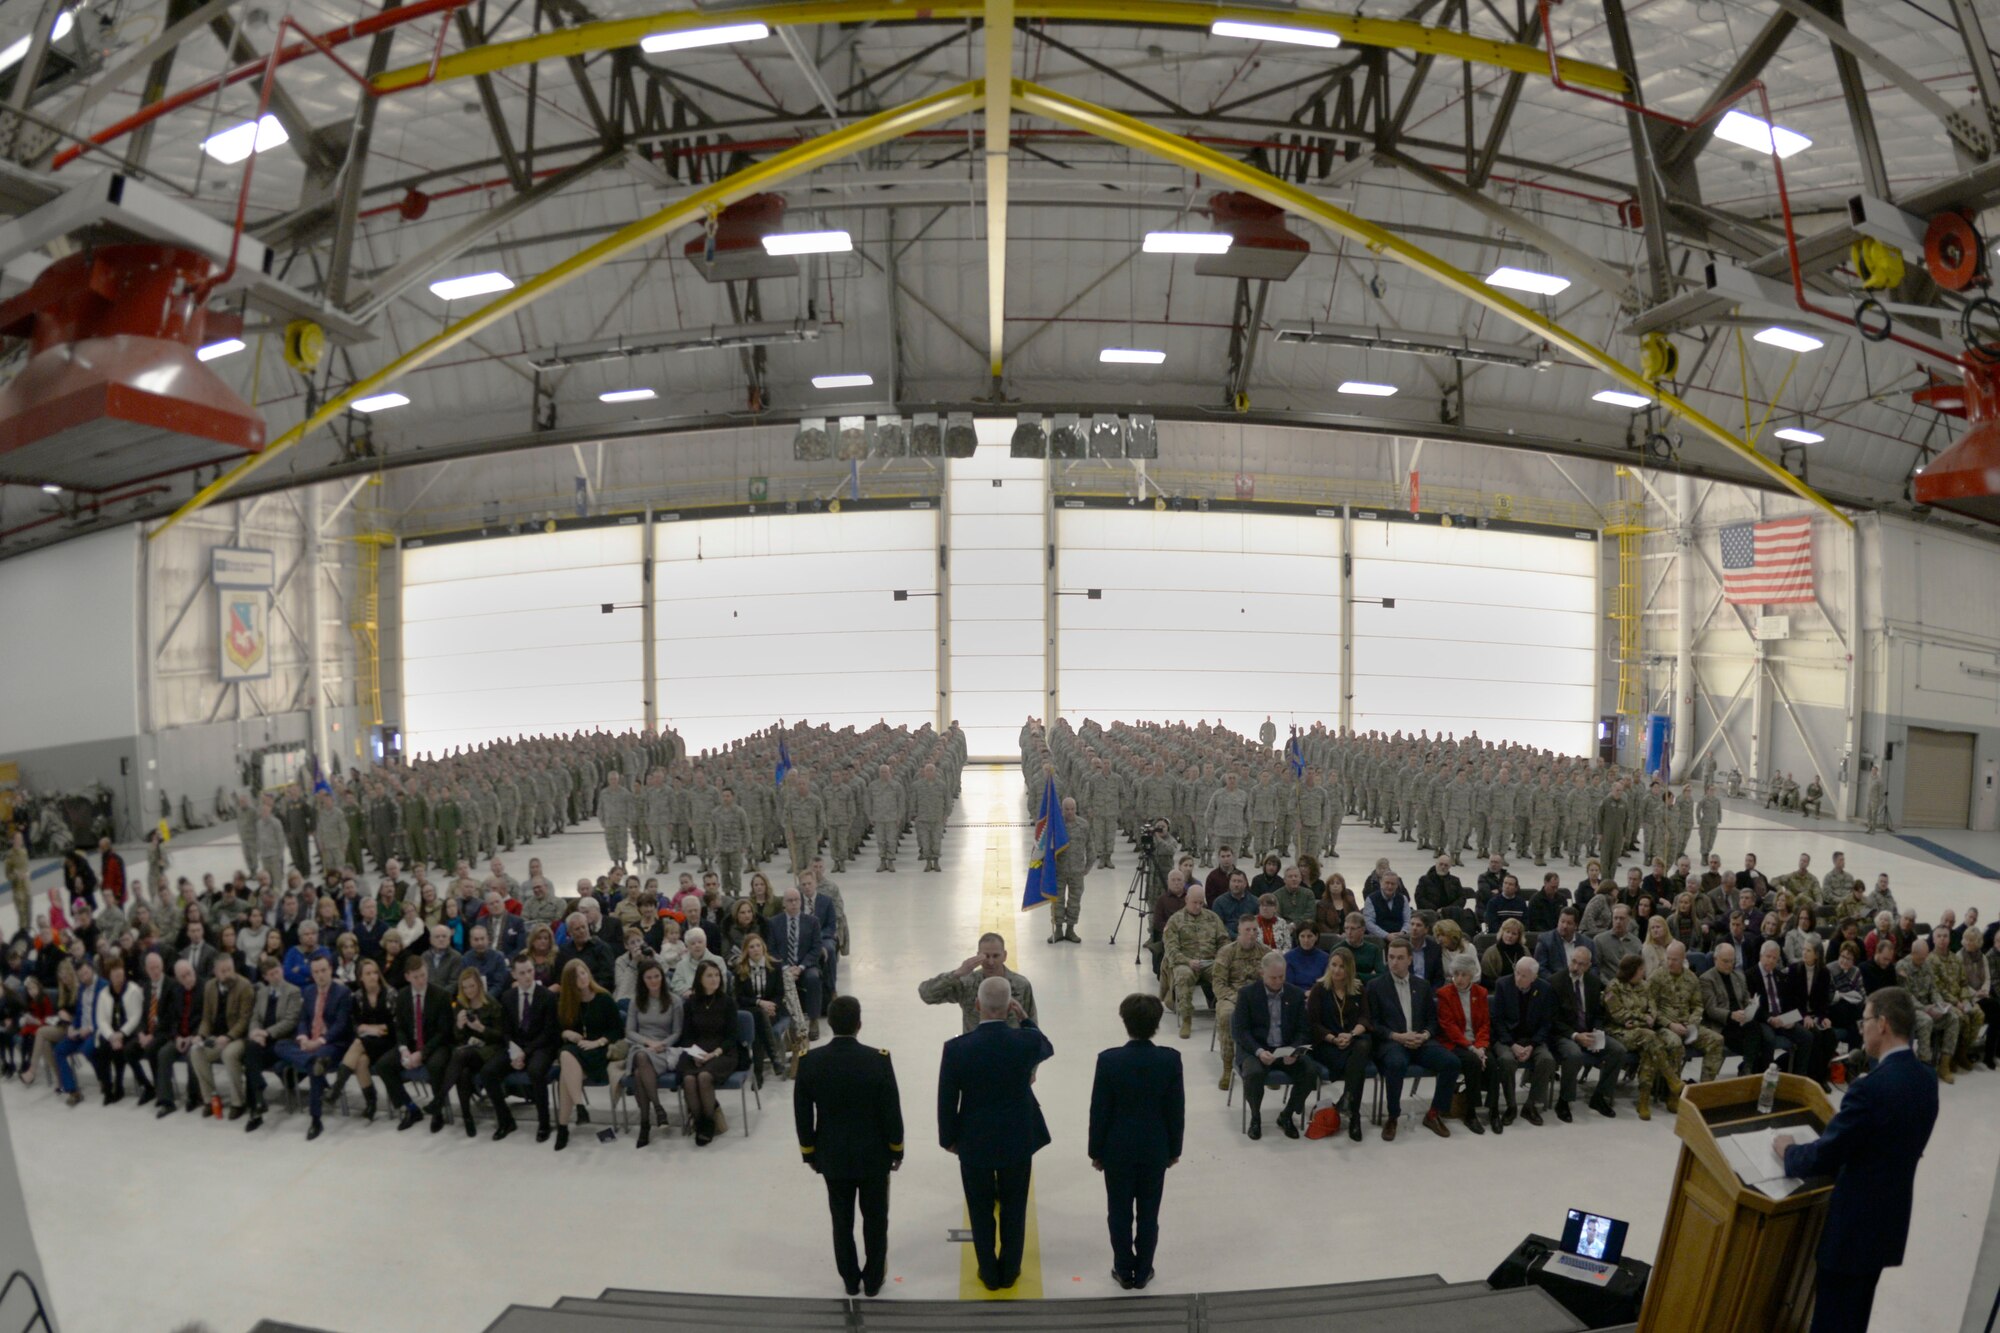 Col. James Ryan, the 157th Air Refueling Wing commander, renders a salute to Brig. Gens. David Mikolaities, Paul Hutchinson, and Laurie Farris, the adjutant general and assistant adjutant general of the N.H. National Guard, and the chief of staff, during Hutchinson's retirement at Pease Air National Guard Base, N.H., Jan. 6, 2018. General Hutchinson retired after serving more than 37 years. (N.H. Air National Guard photo by Senior Airman Taylor Queen)